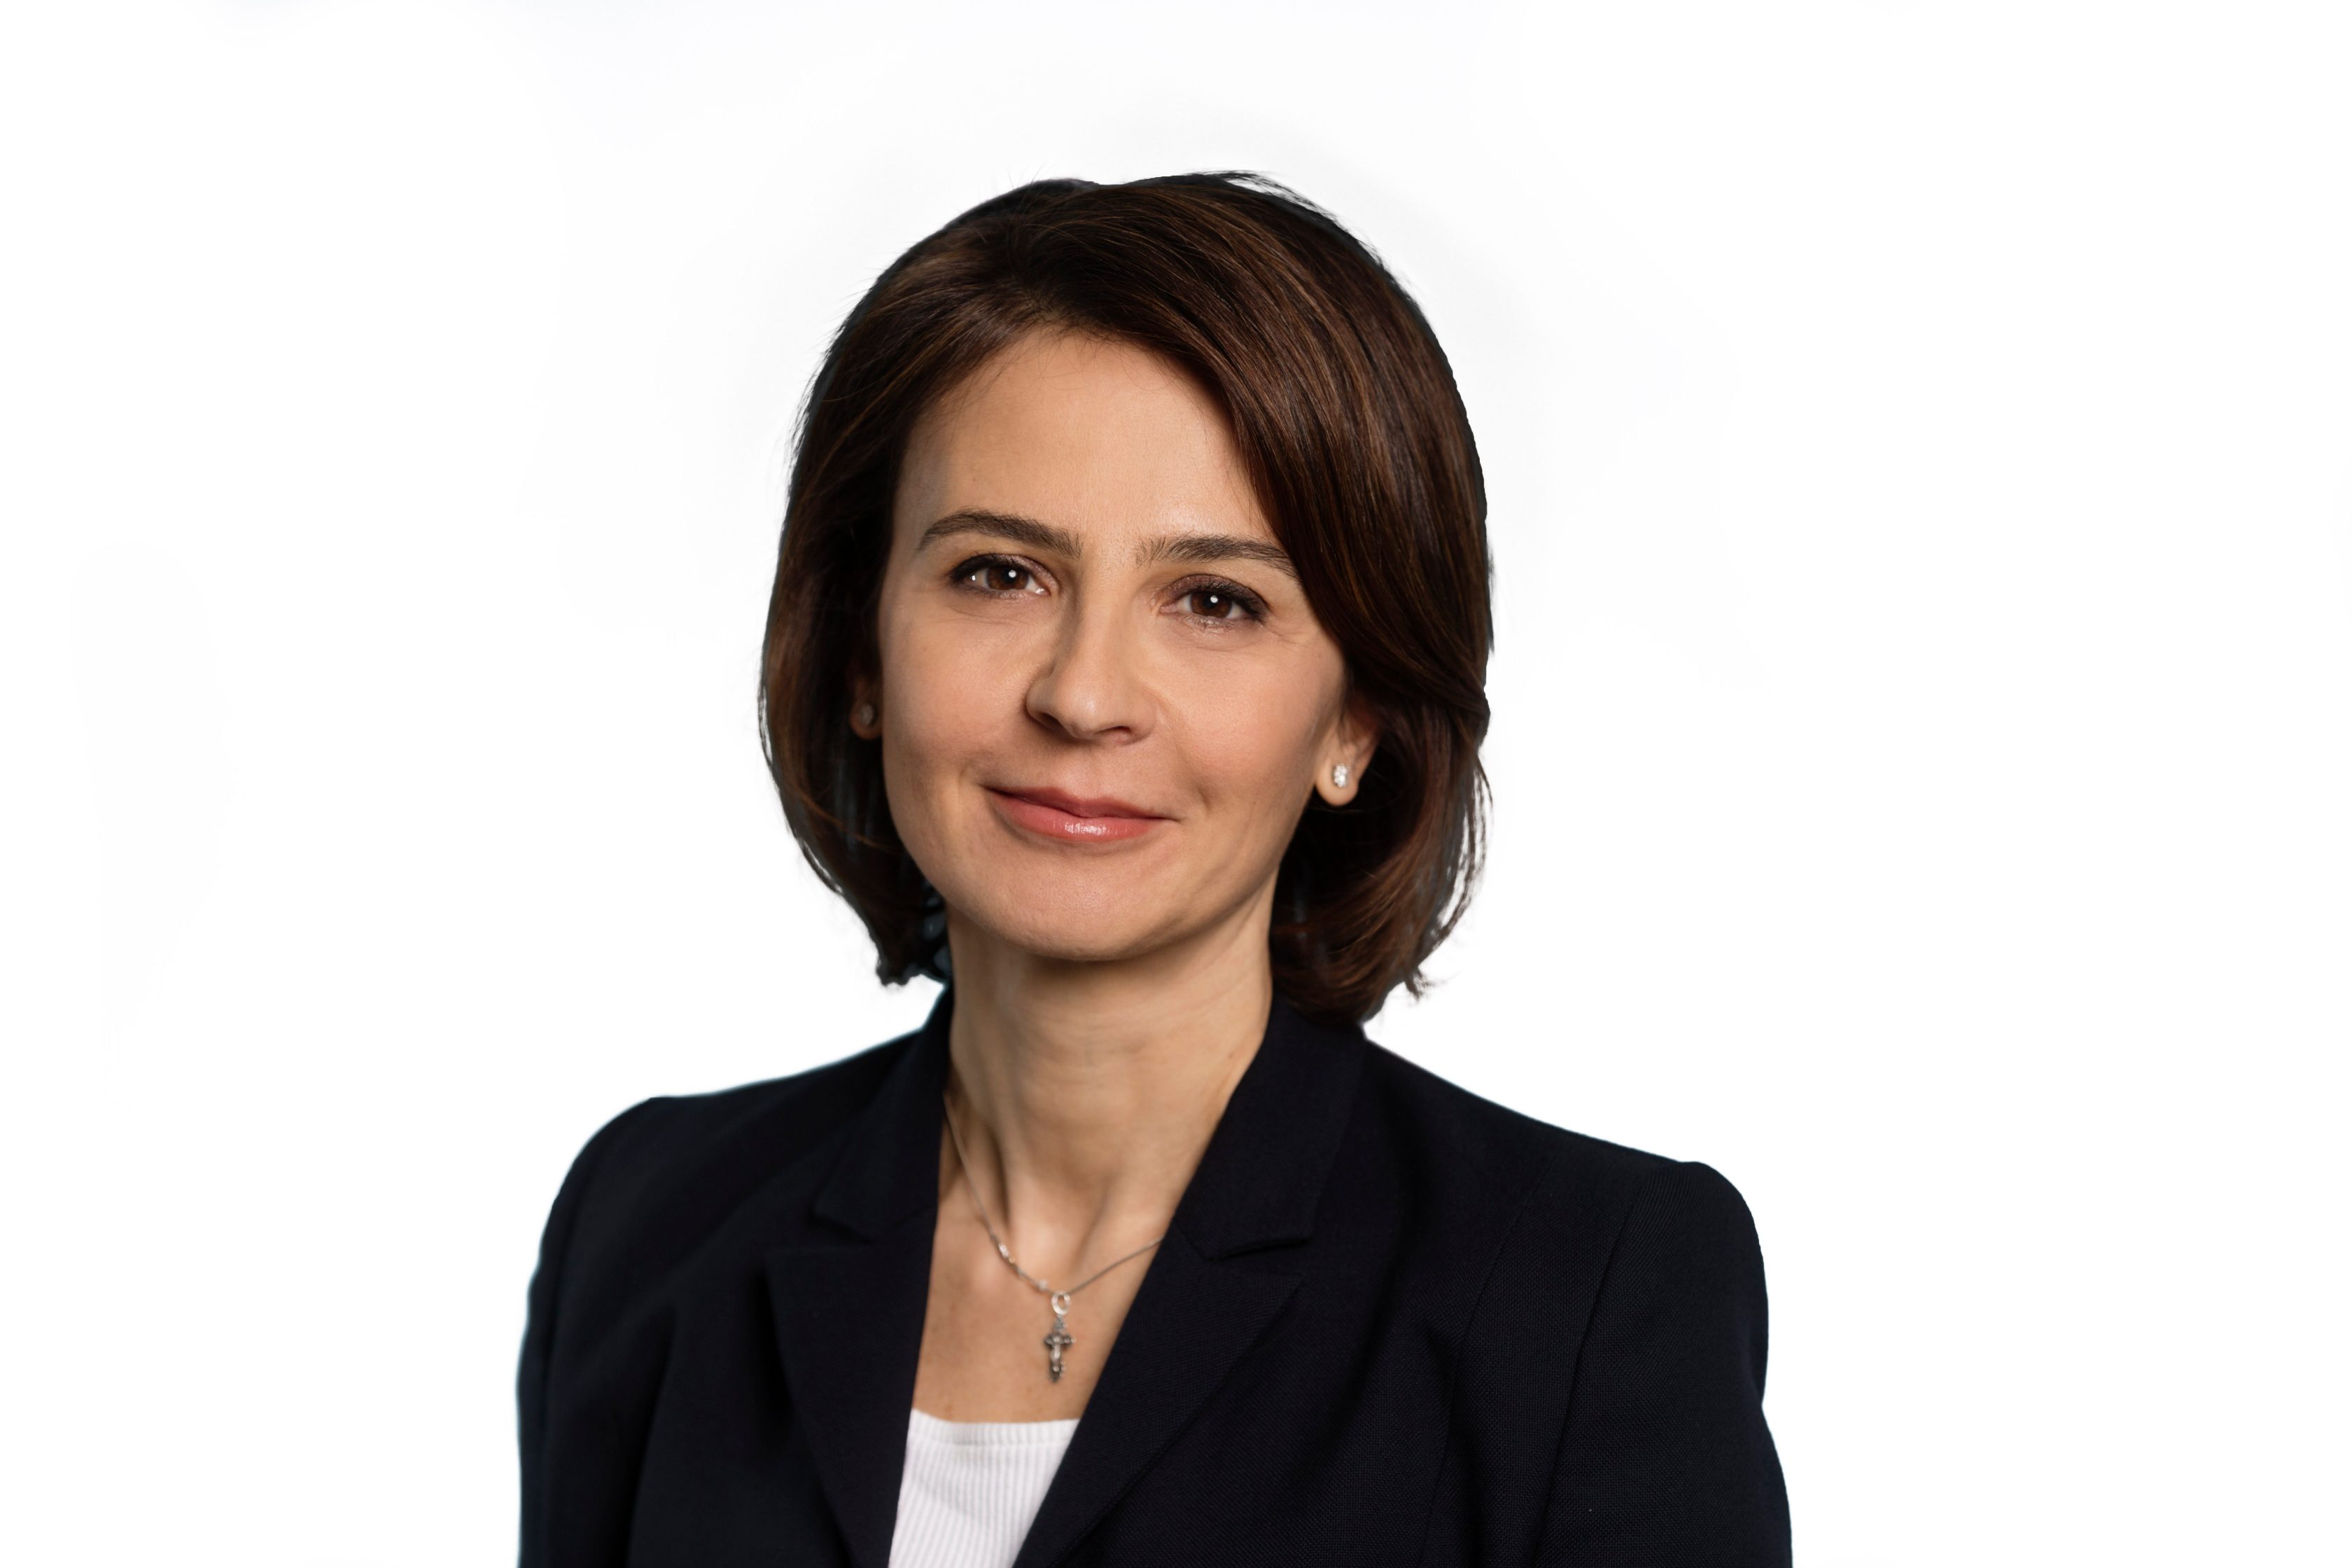 Headshot of Sirma Boshnakova, who was recently appointed to the Allianz Board of Management